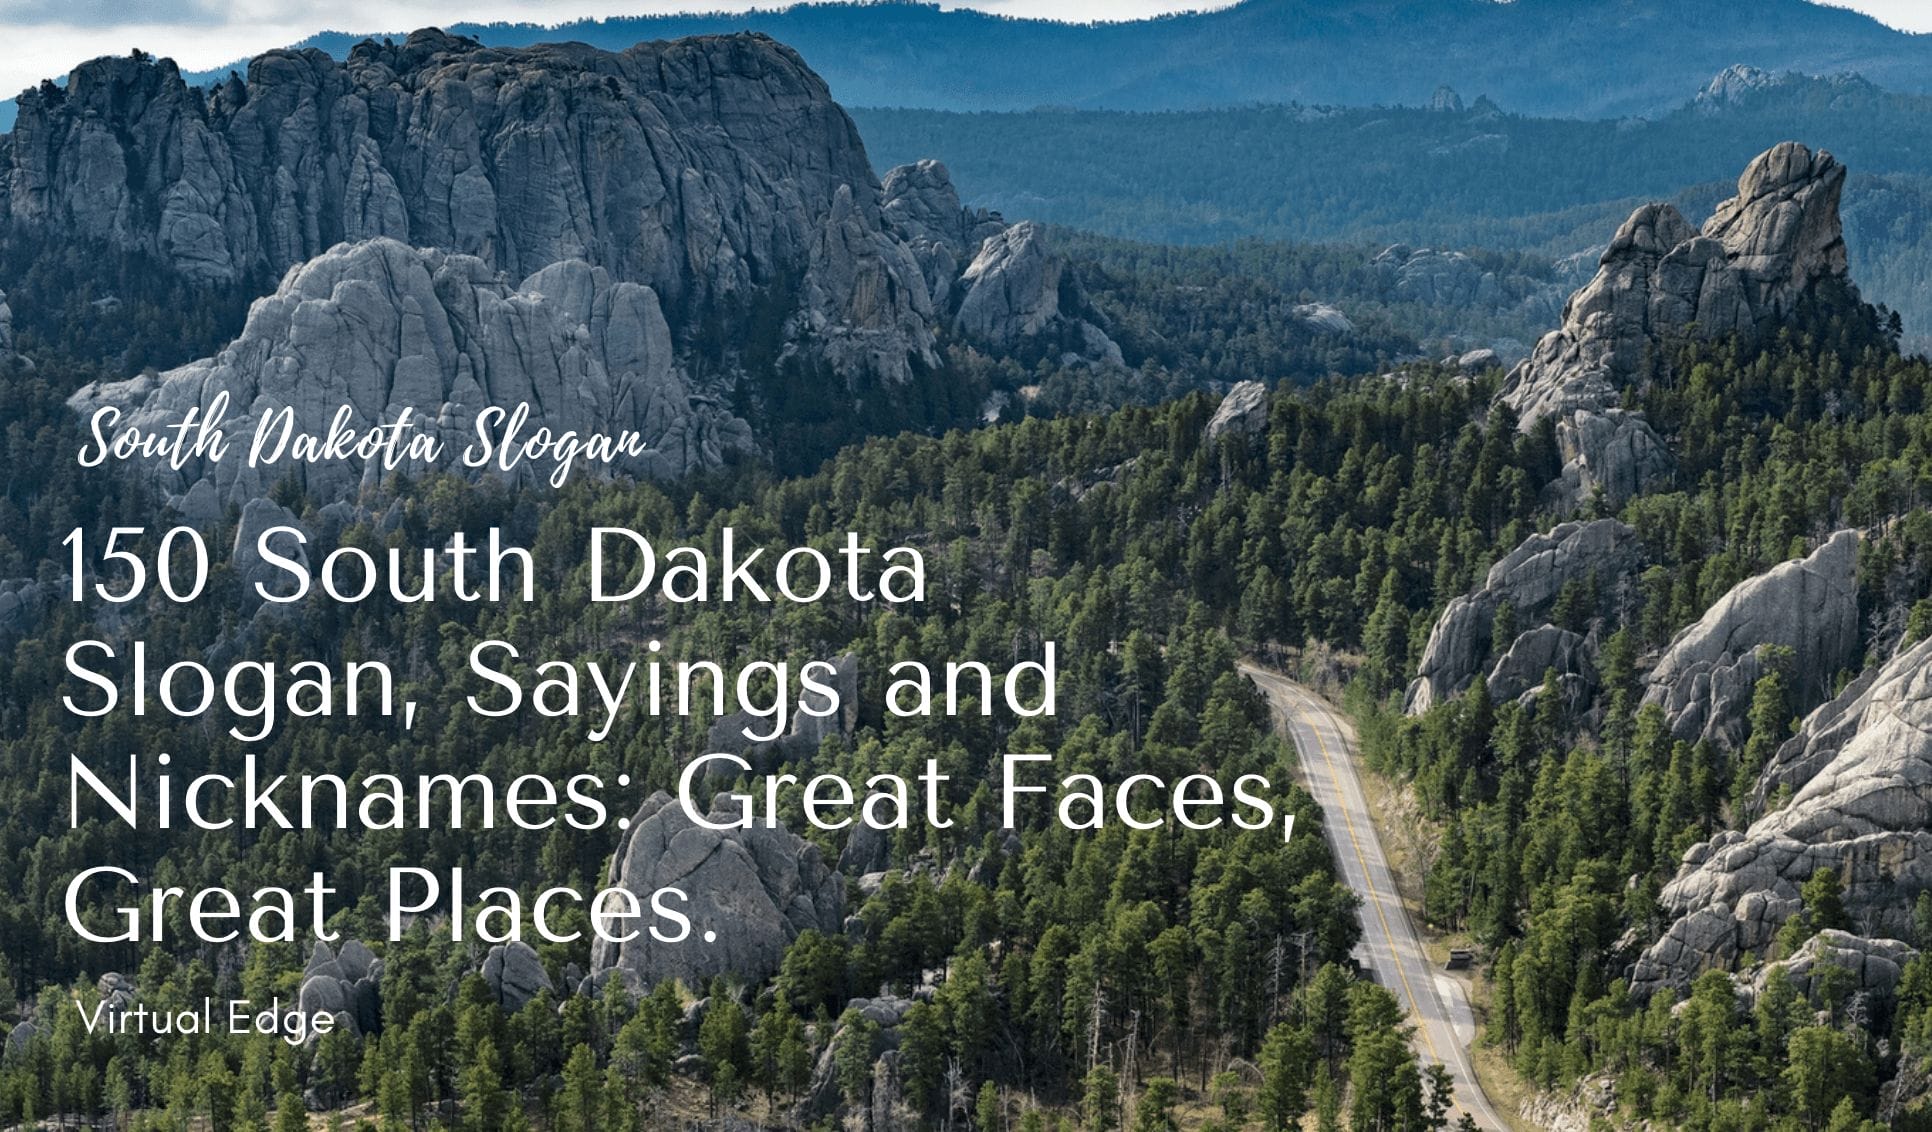 150 South Dakota Slogan, Sayings and Nicknames: Great Faces, Great Places